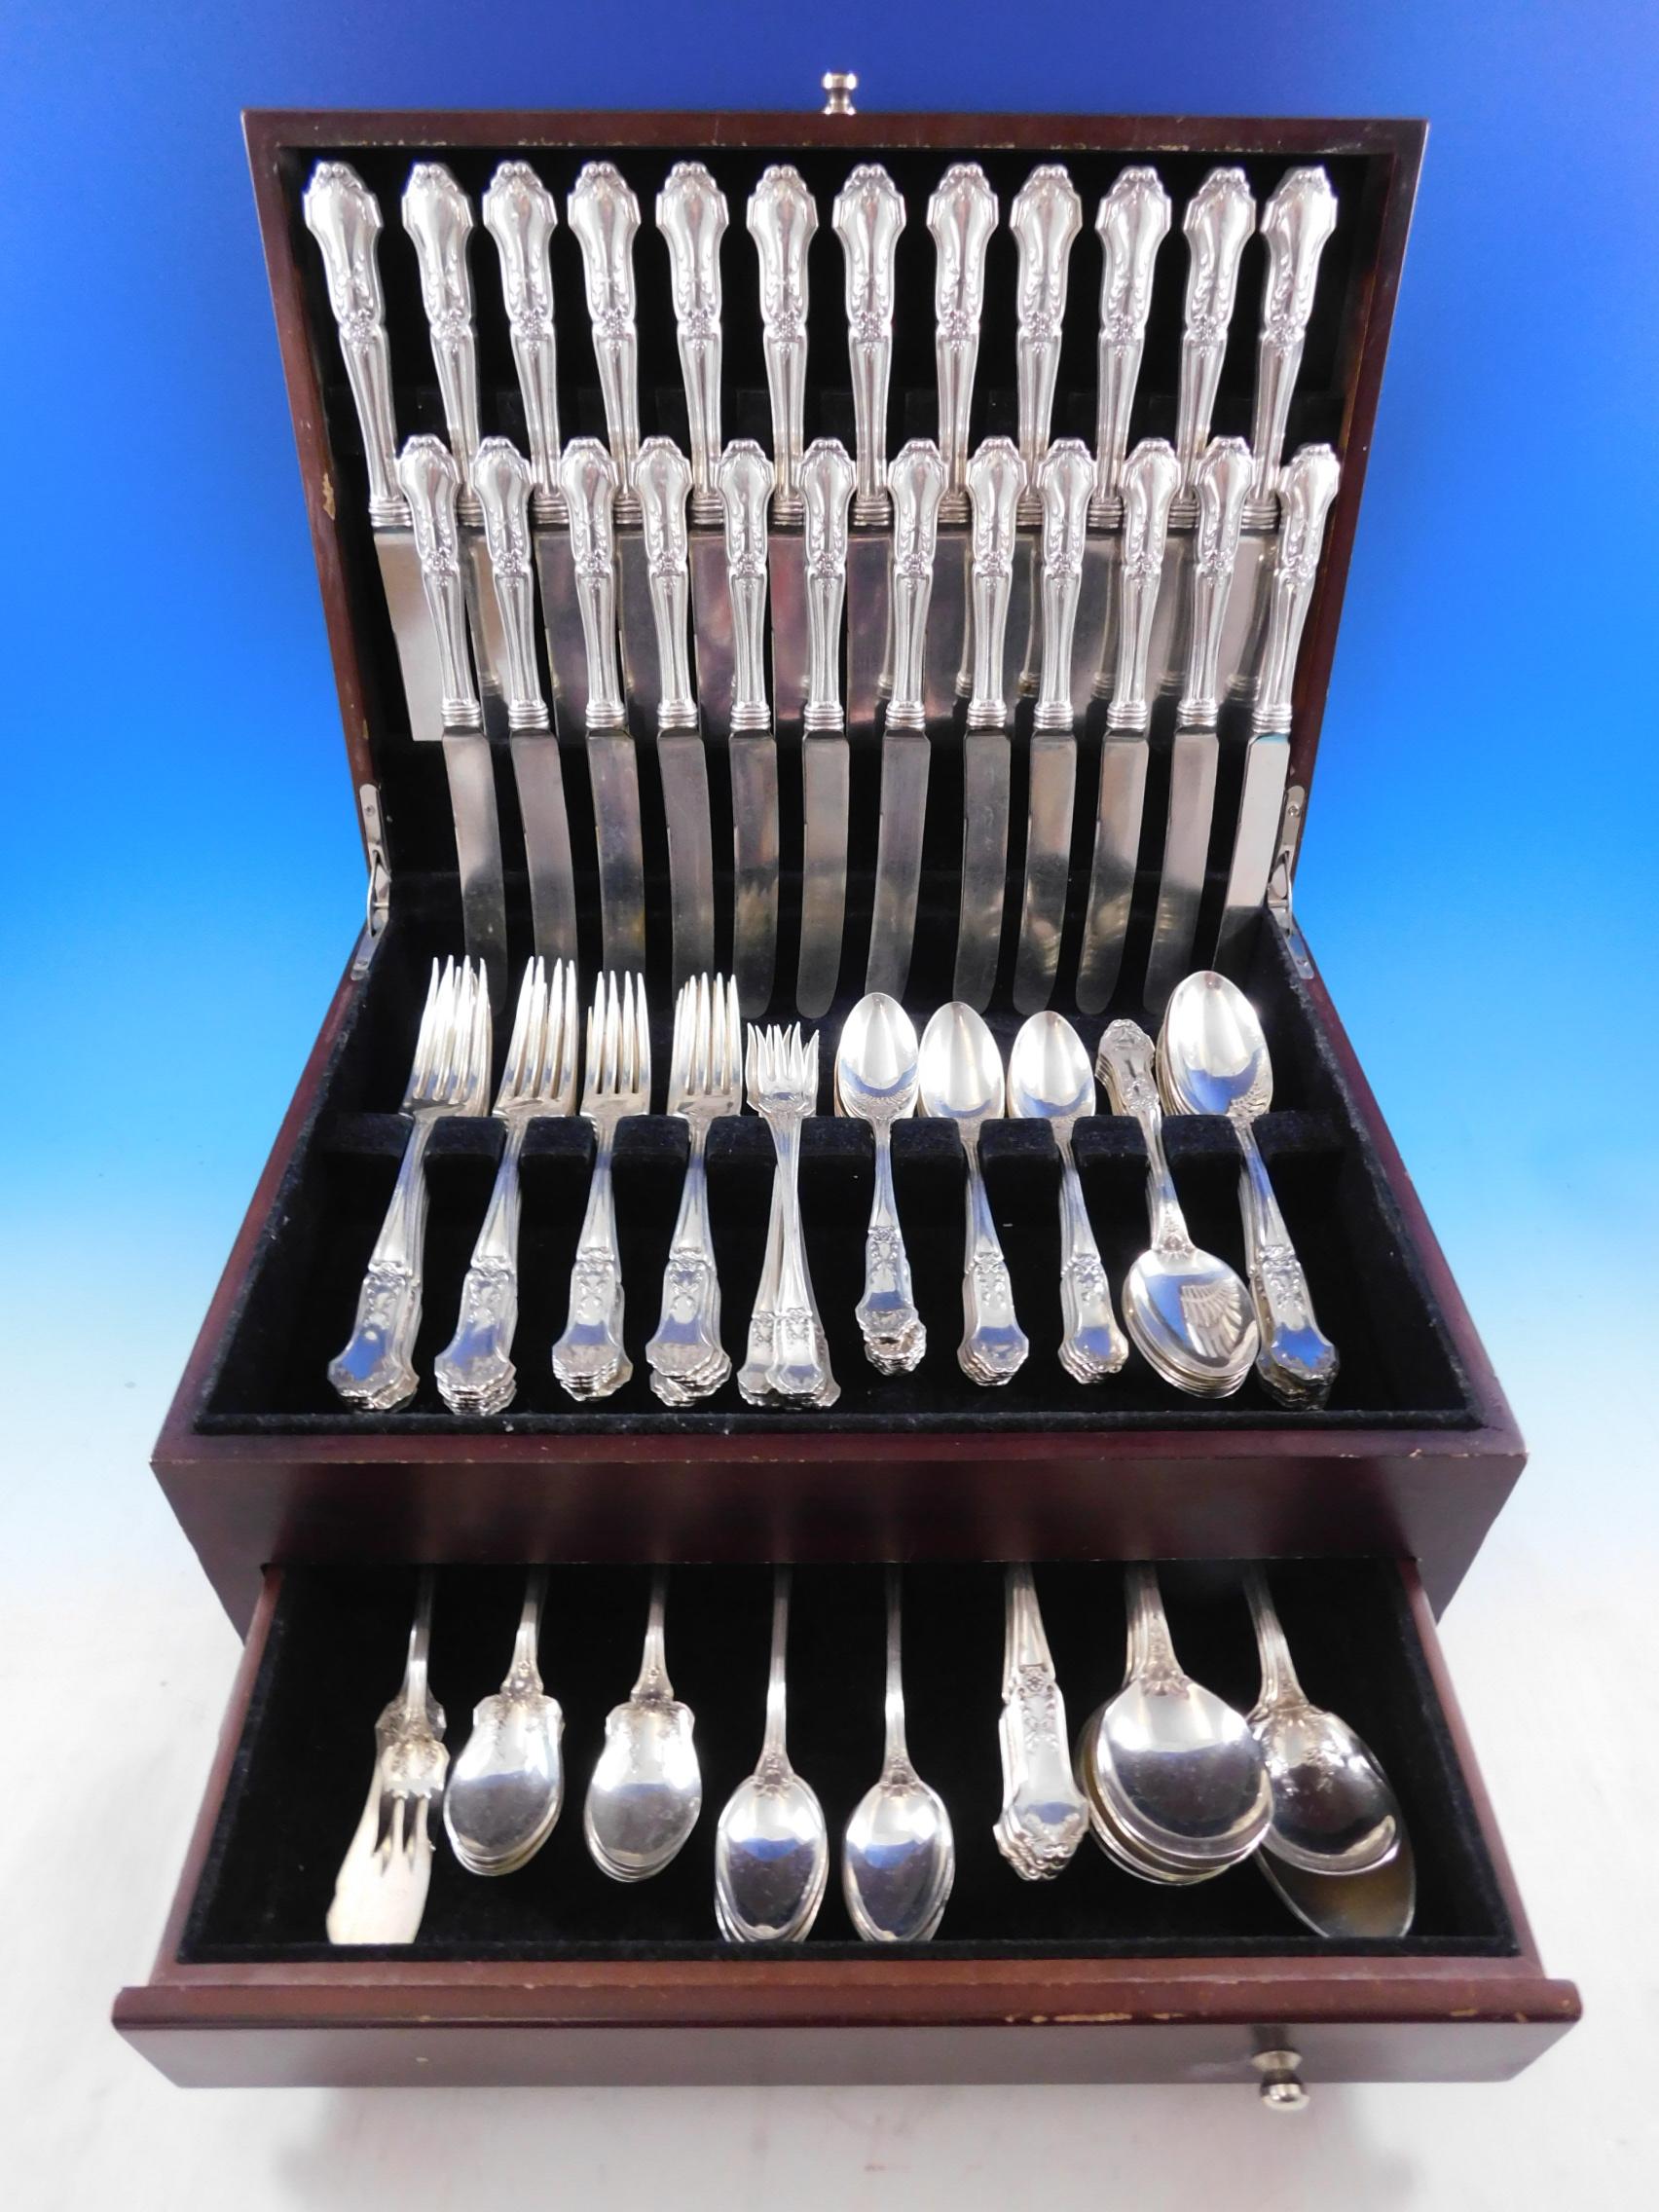 Monumental rare La Rochelle by International, circa 1909, sterling silver Flatware set - 137 Pieces. This set includes:

12 Dinner Size Knives w/plated blades, 10